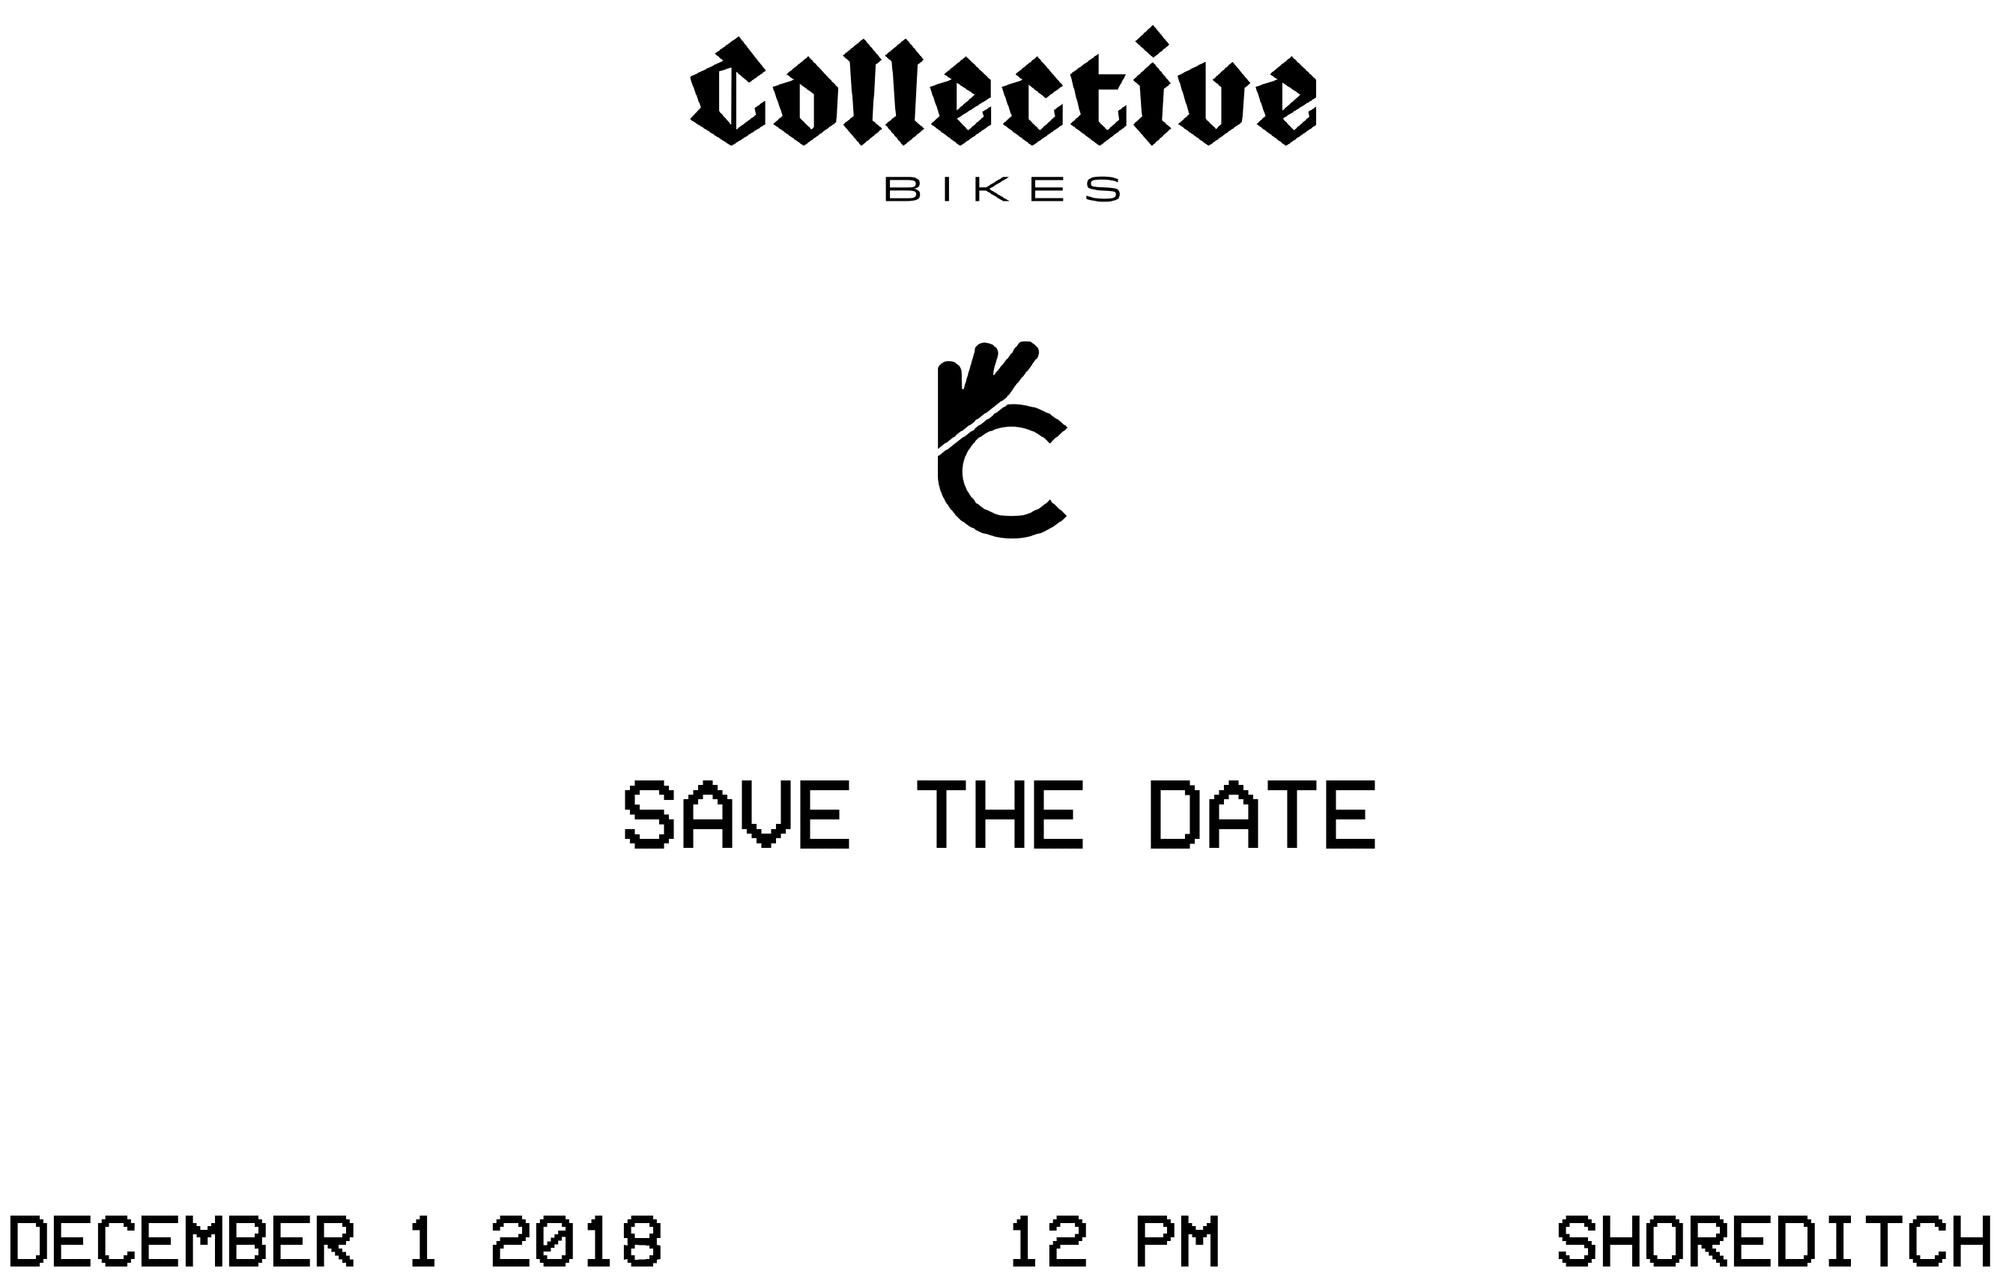 COLLECTIVE BIKES EVENT - DECEMBER 1ST